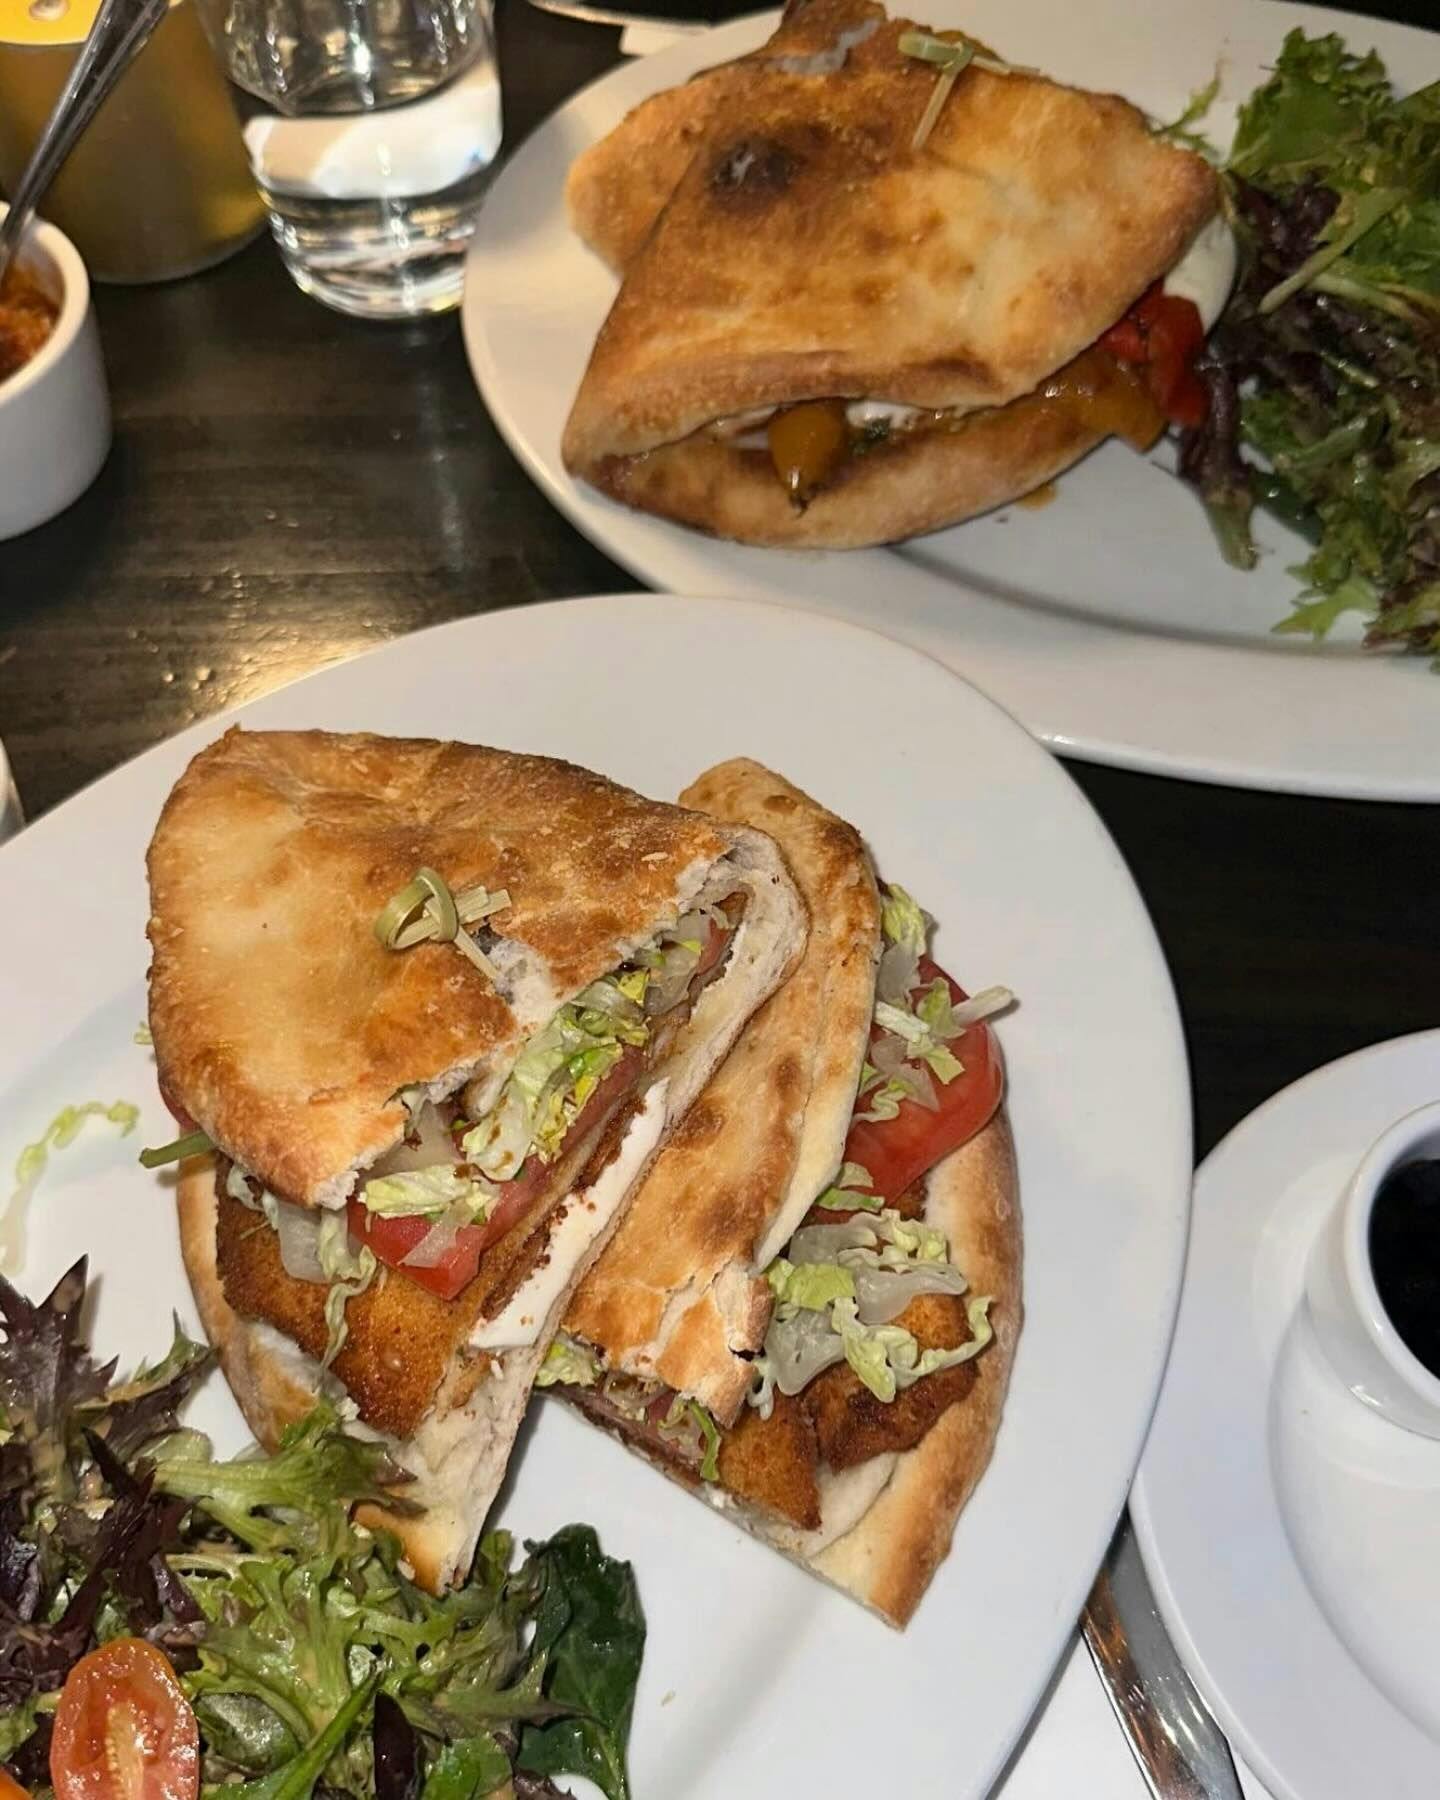 Grilled chicken sandwich cut in halves, stuffed with fresh lettuce and tomato, served with a side of mixed green salad, representing the casual yet quality dining options available in New York through Booked.